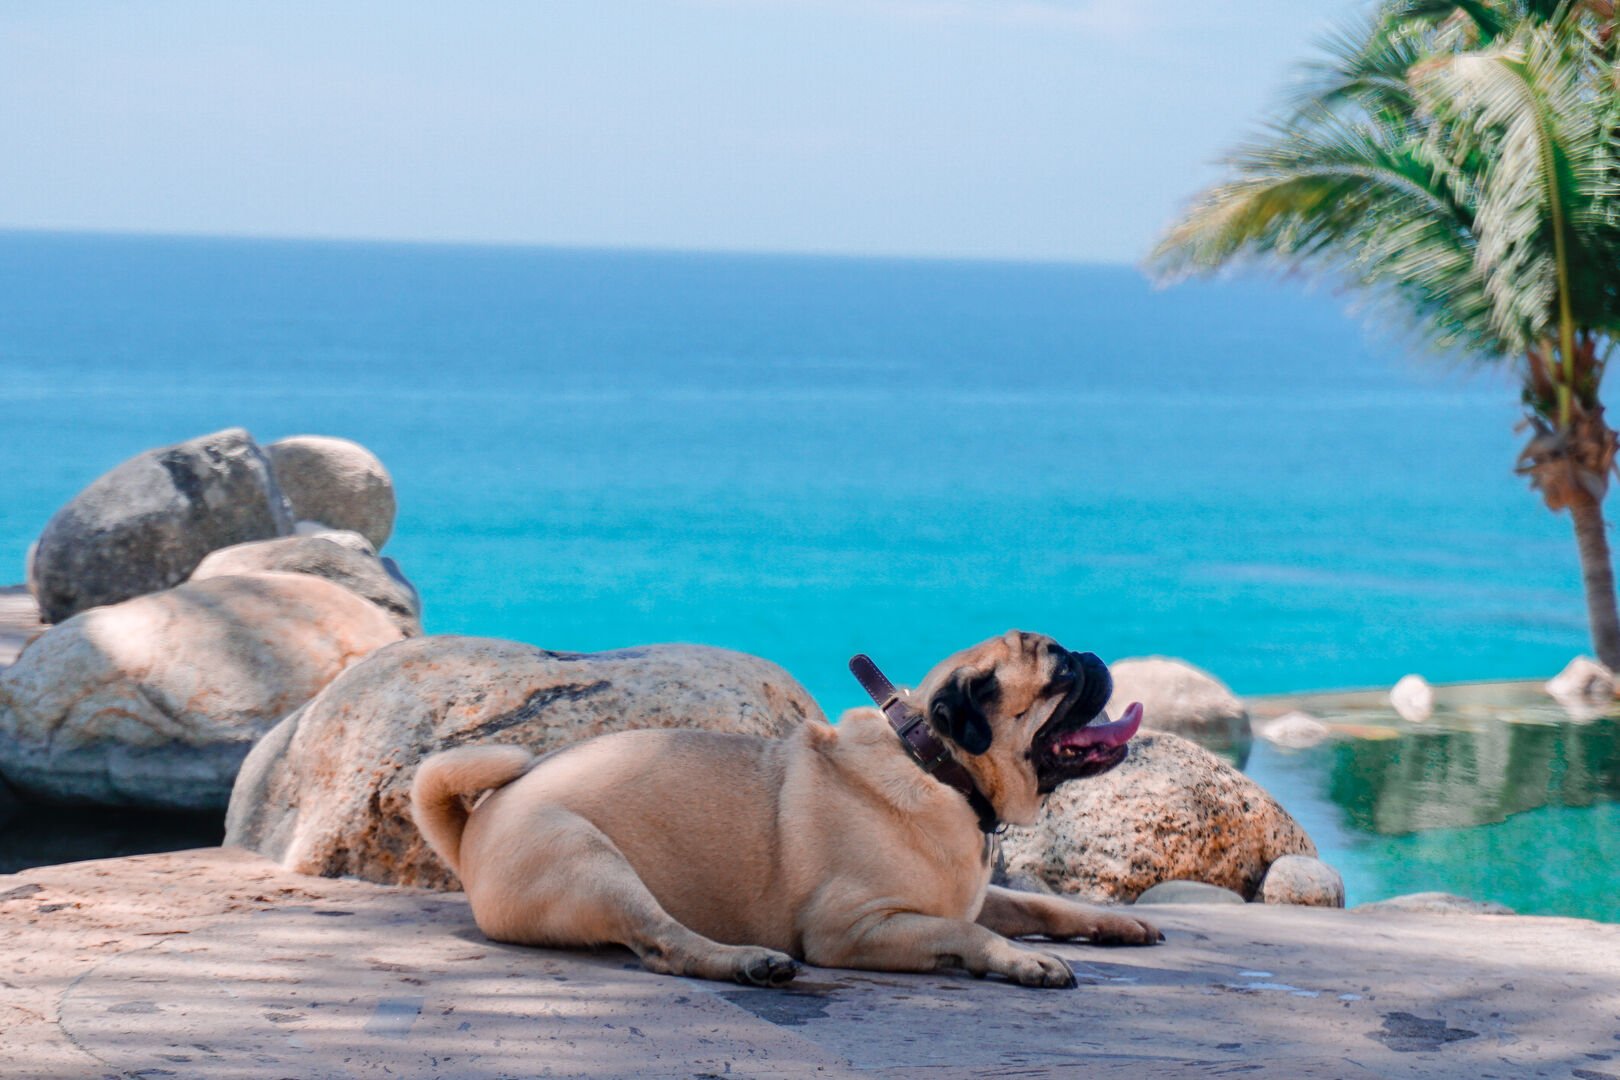 PET FRIENDLY, BRING YOUR BEST FRIEND ON VACATION WITH YOU